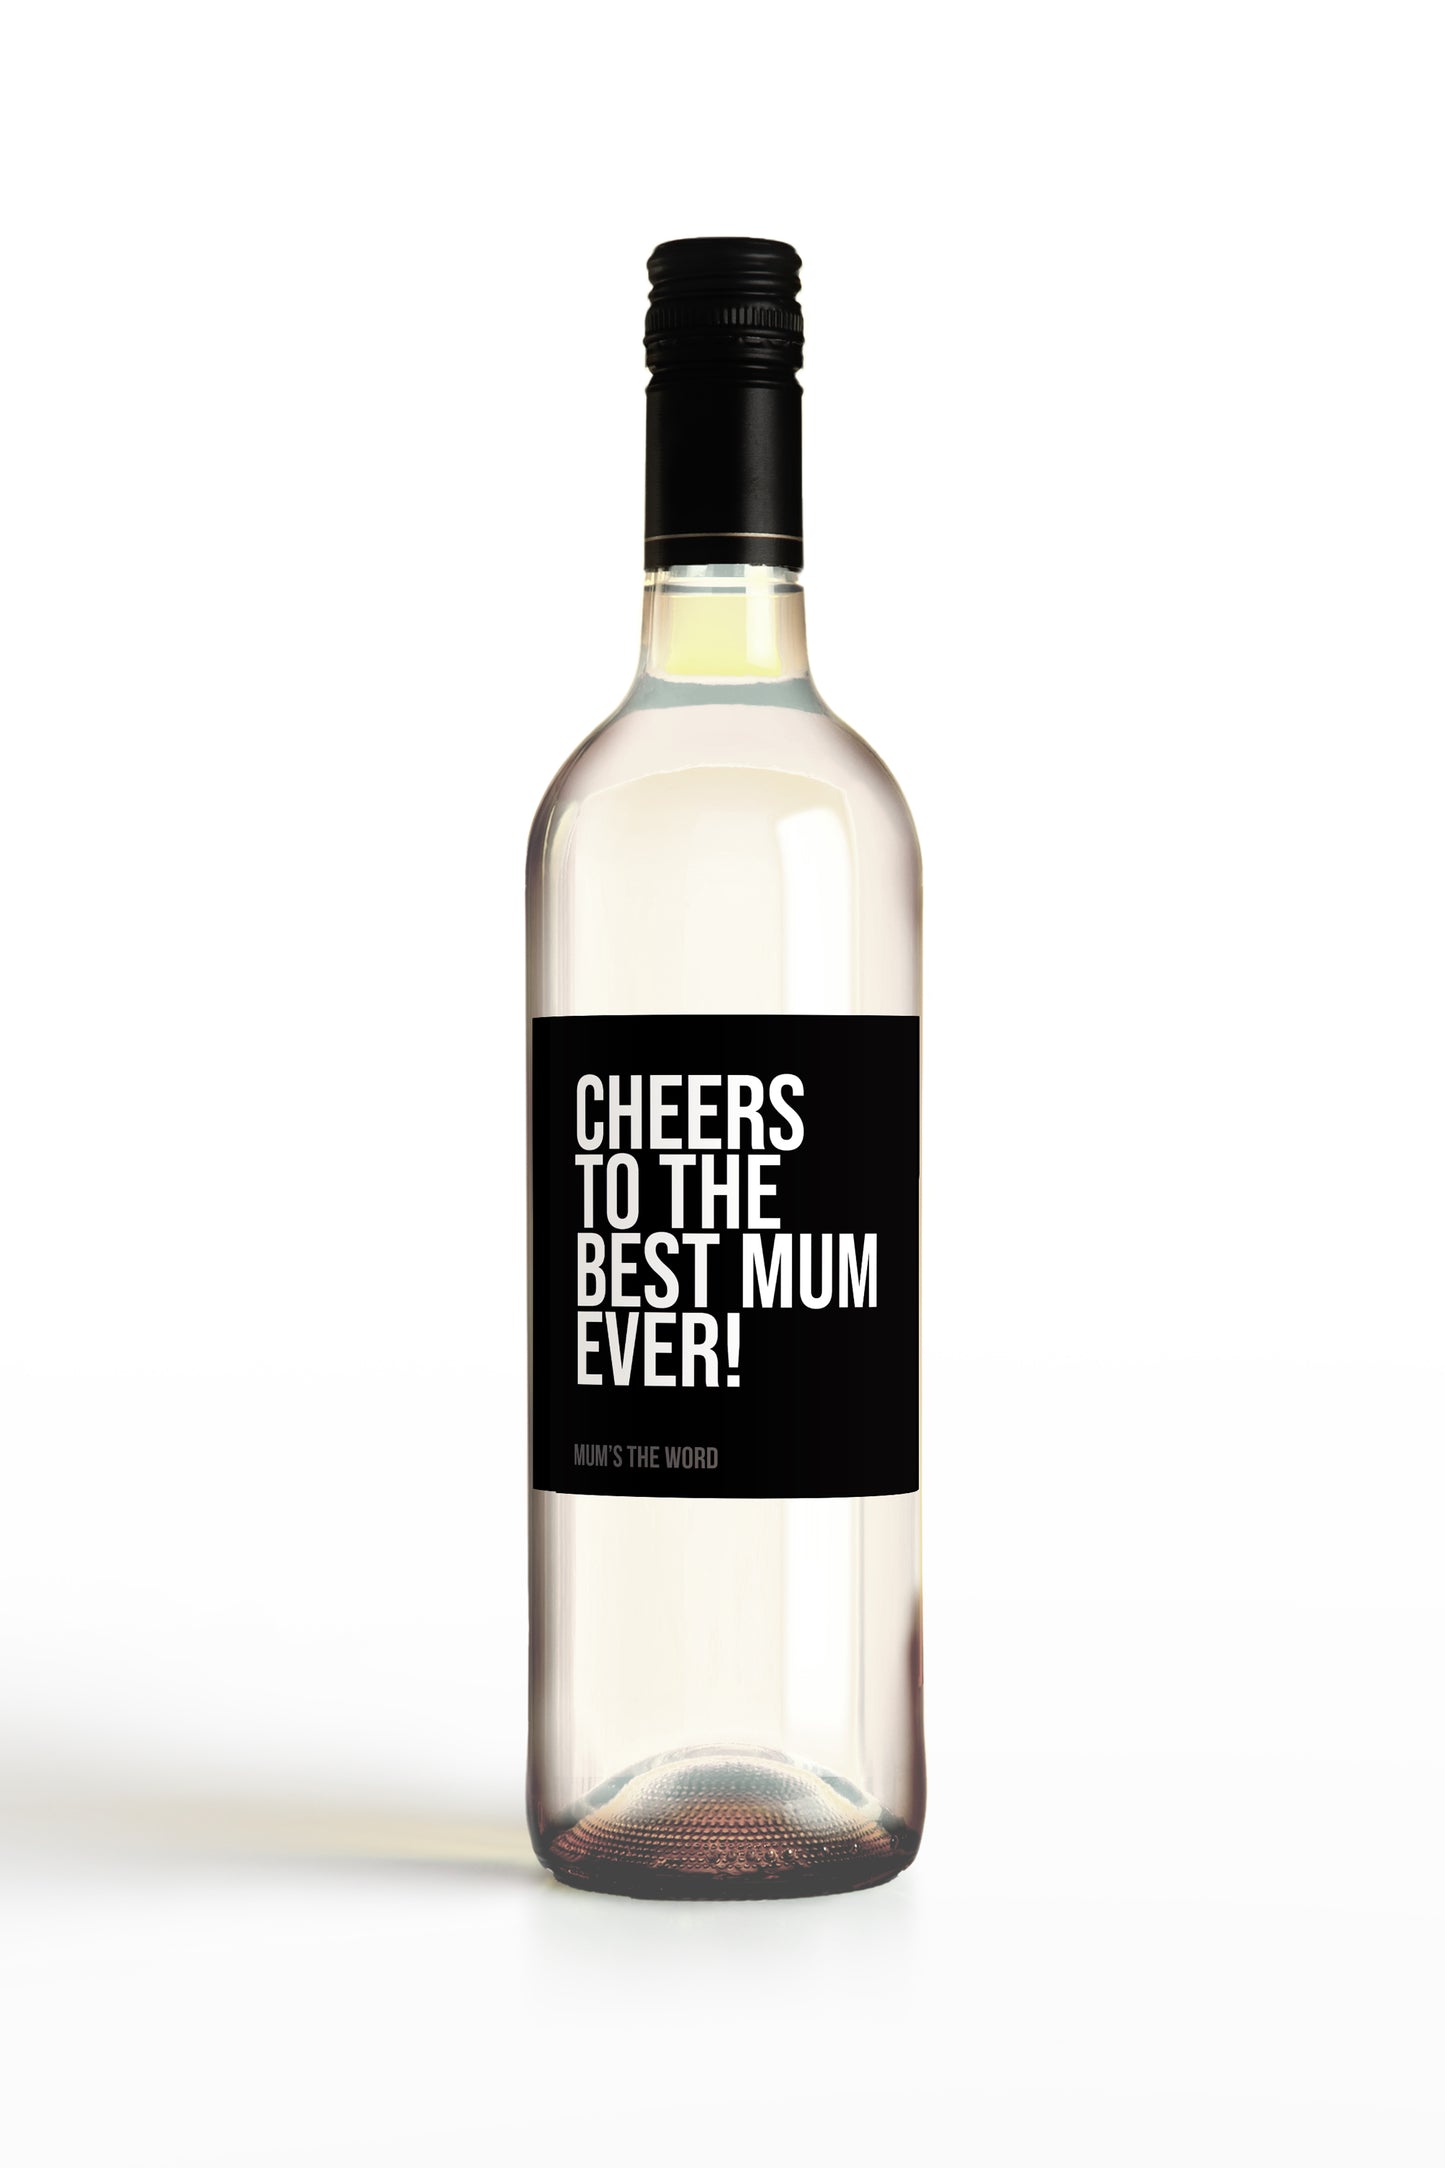 Cheers To The Best Mum Ever!